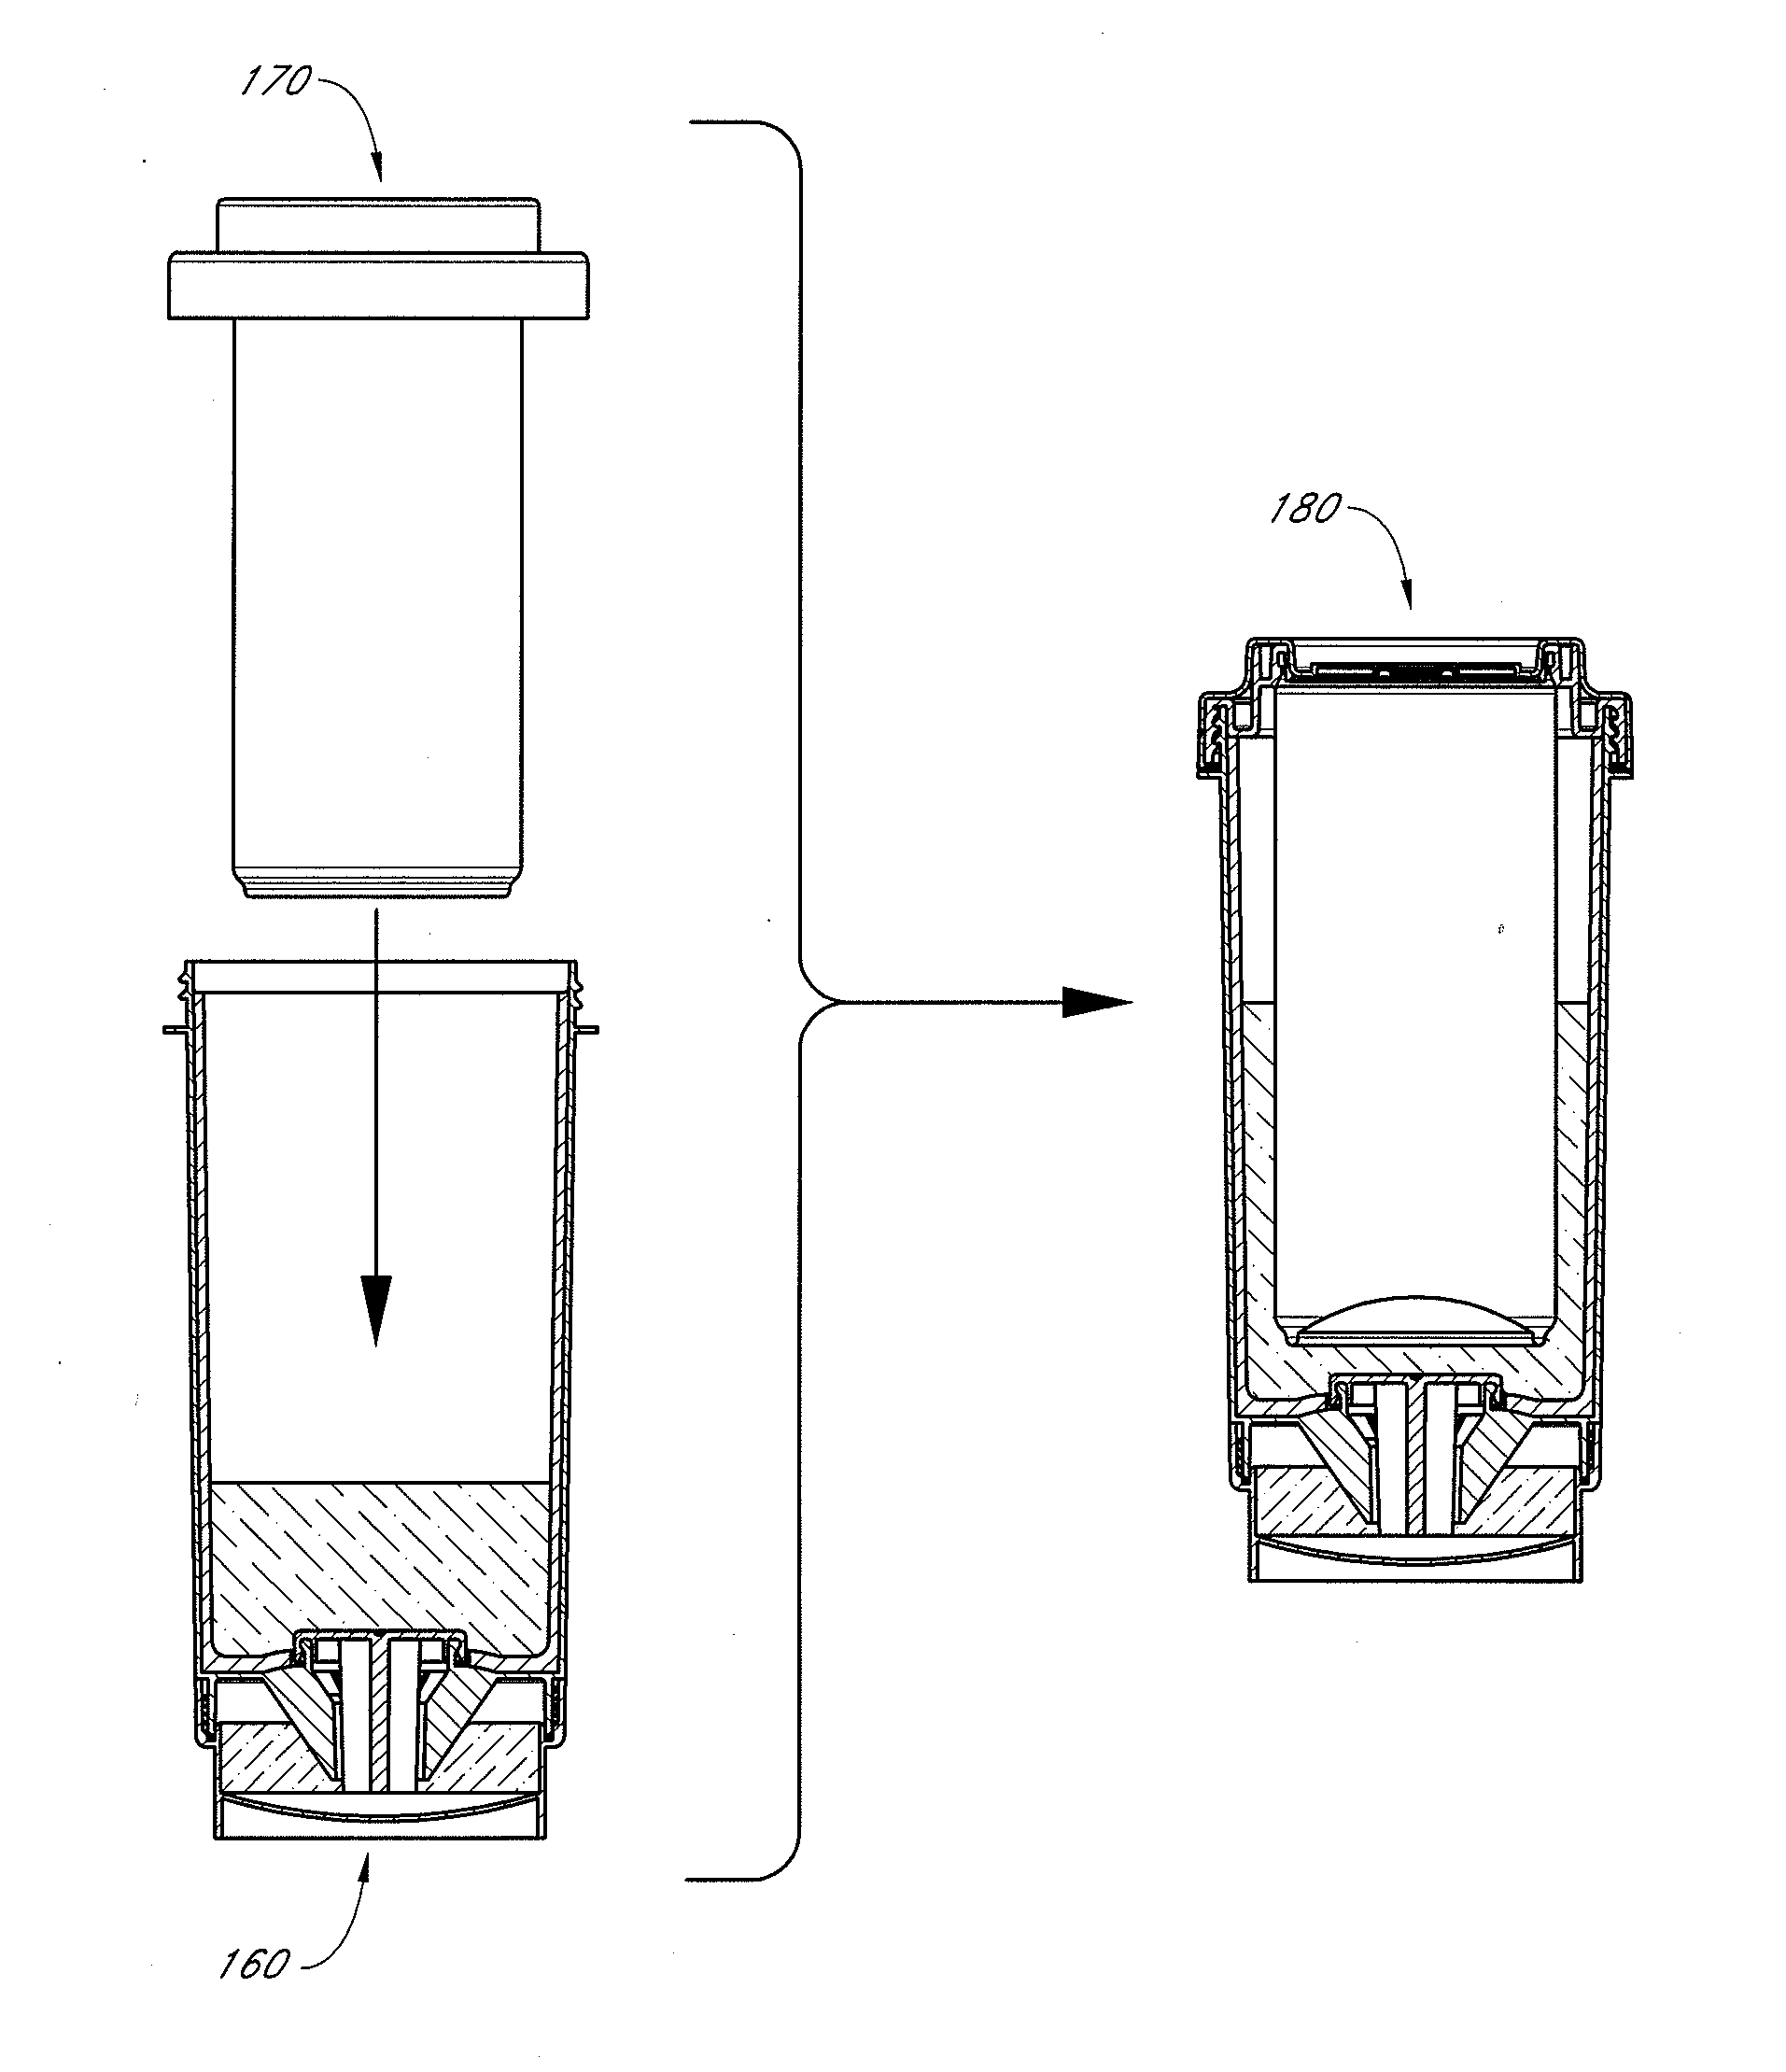 Self-cooling compositions, systems and methods